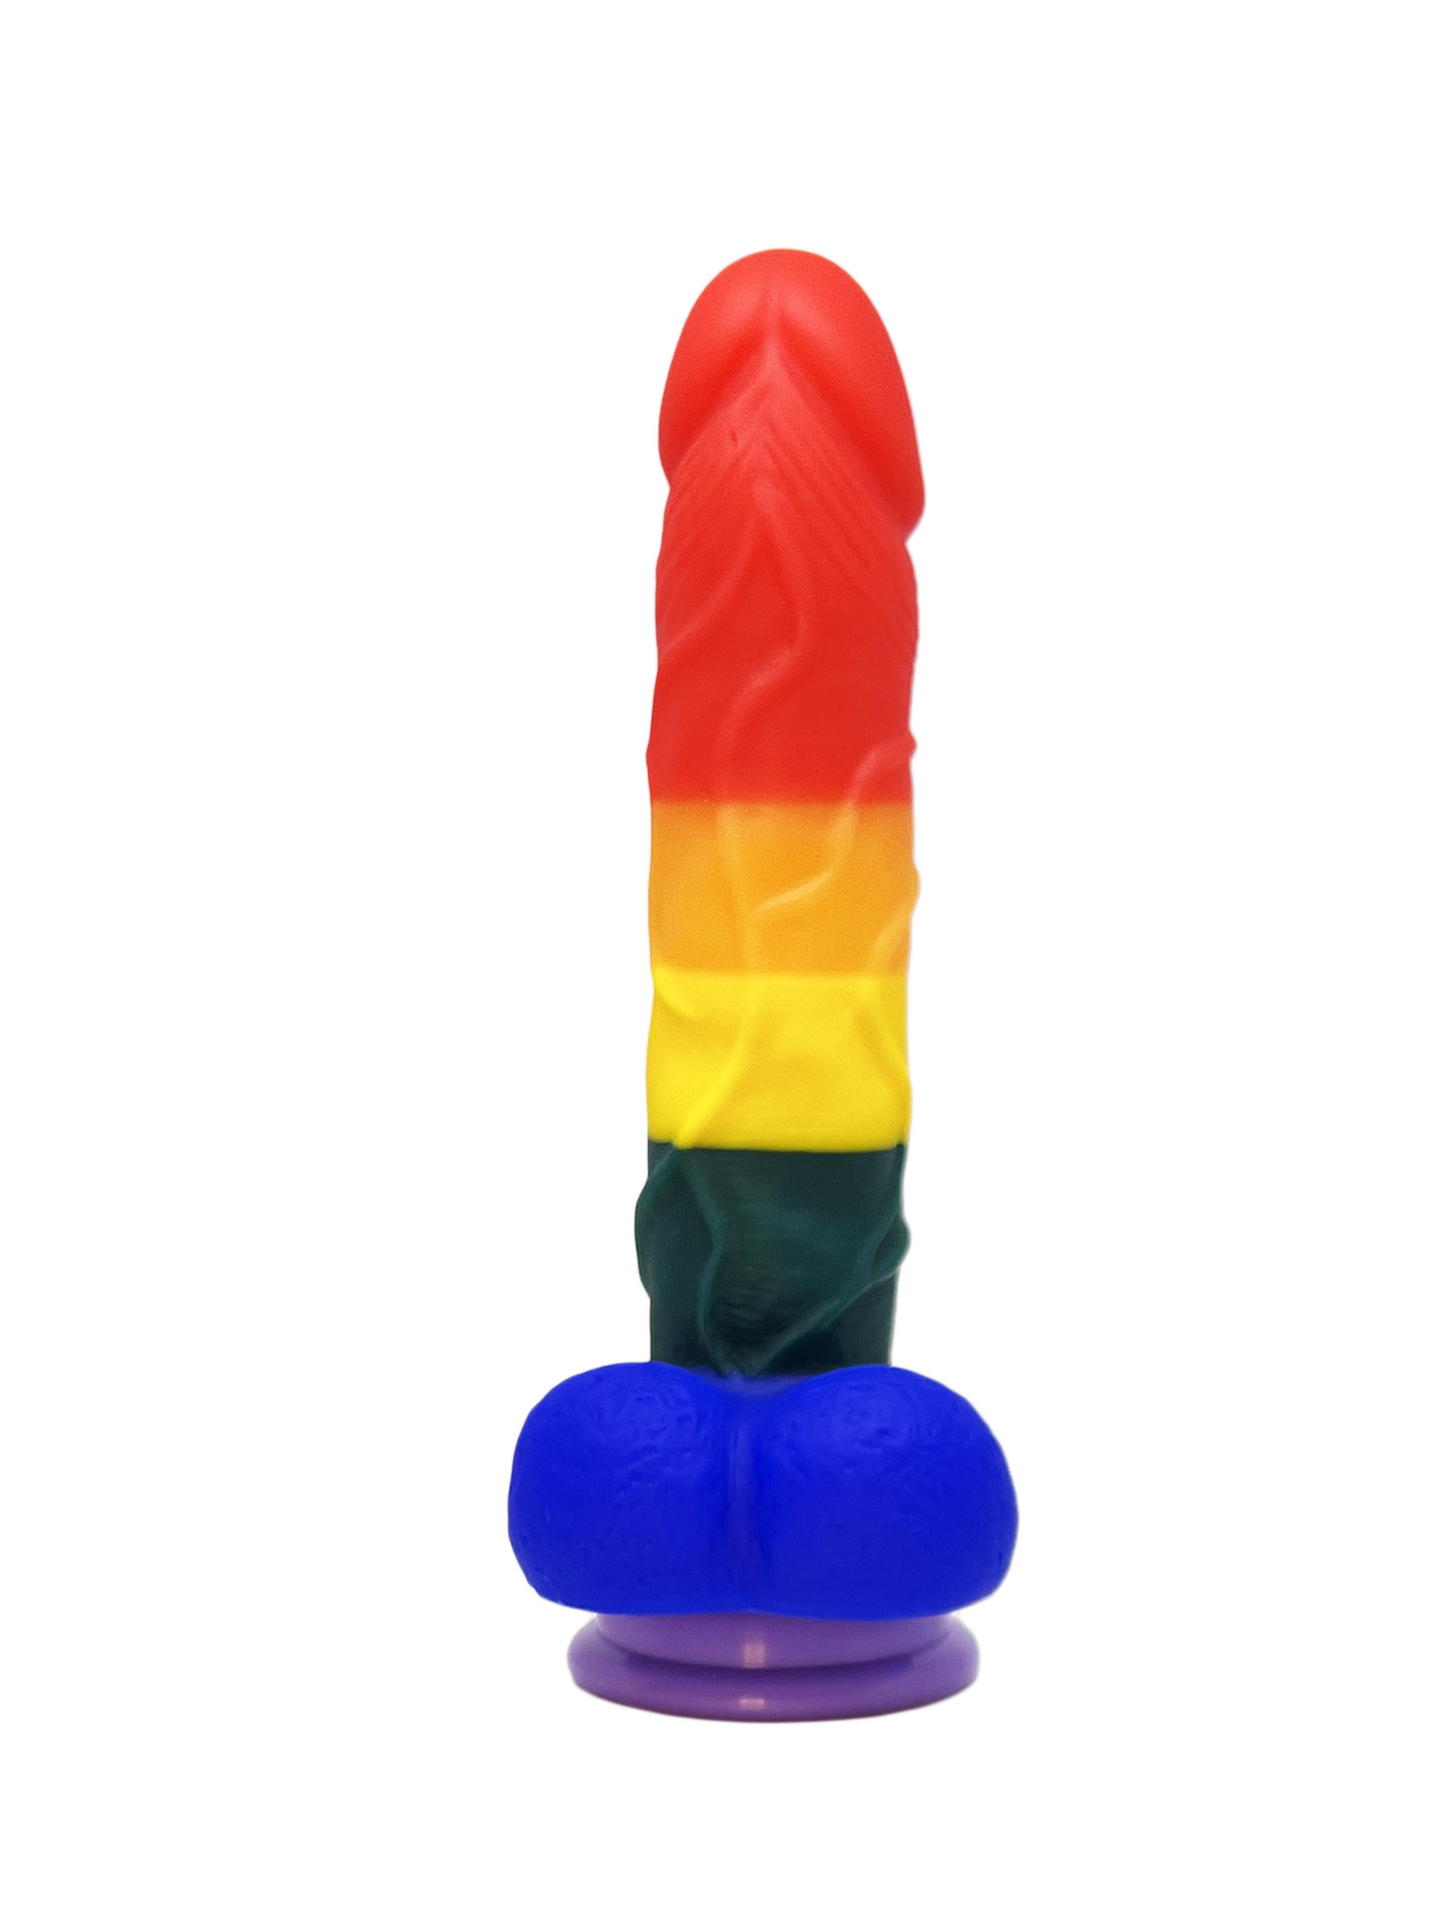 Another Gay Rainbow Dildo from back